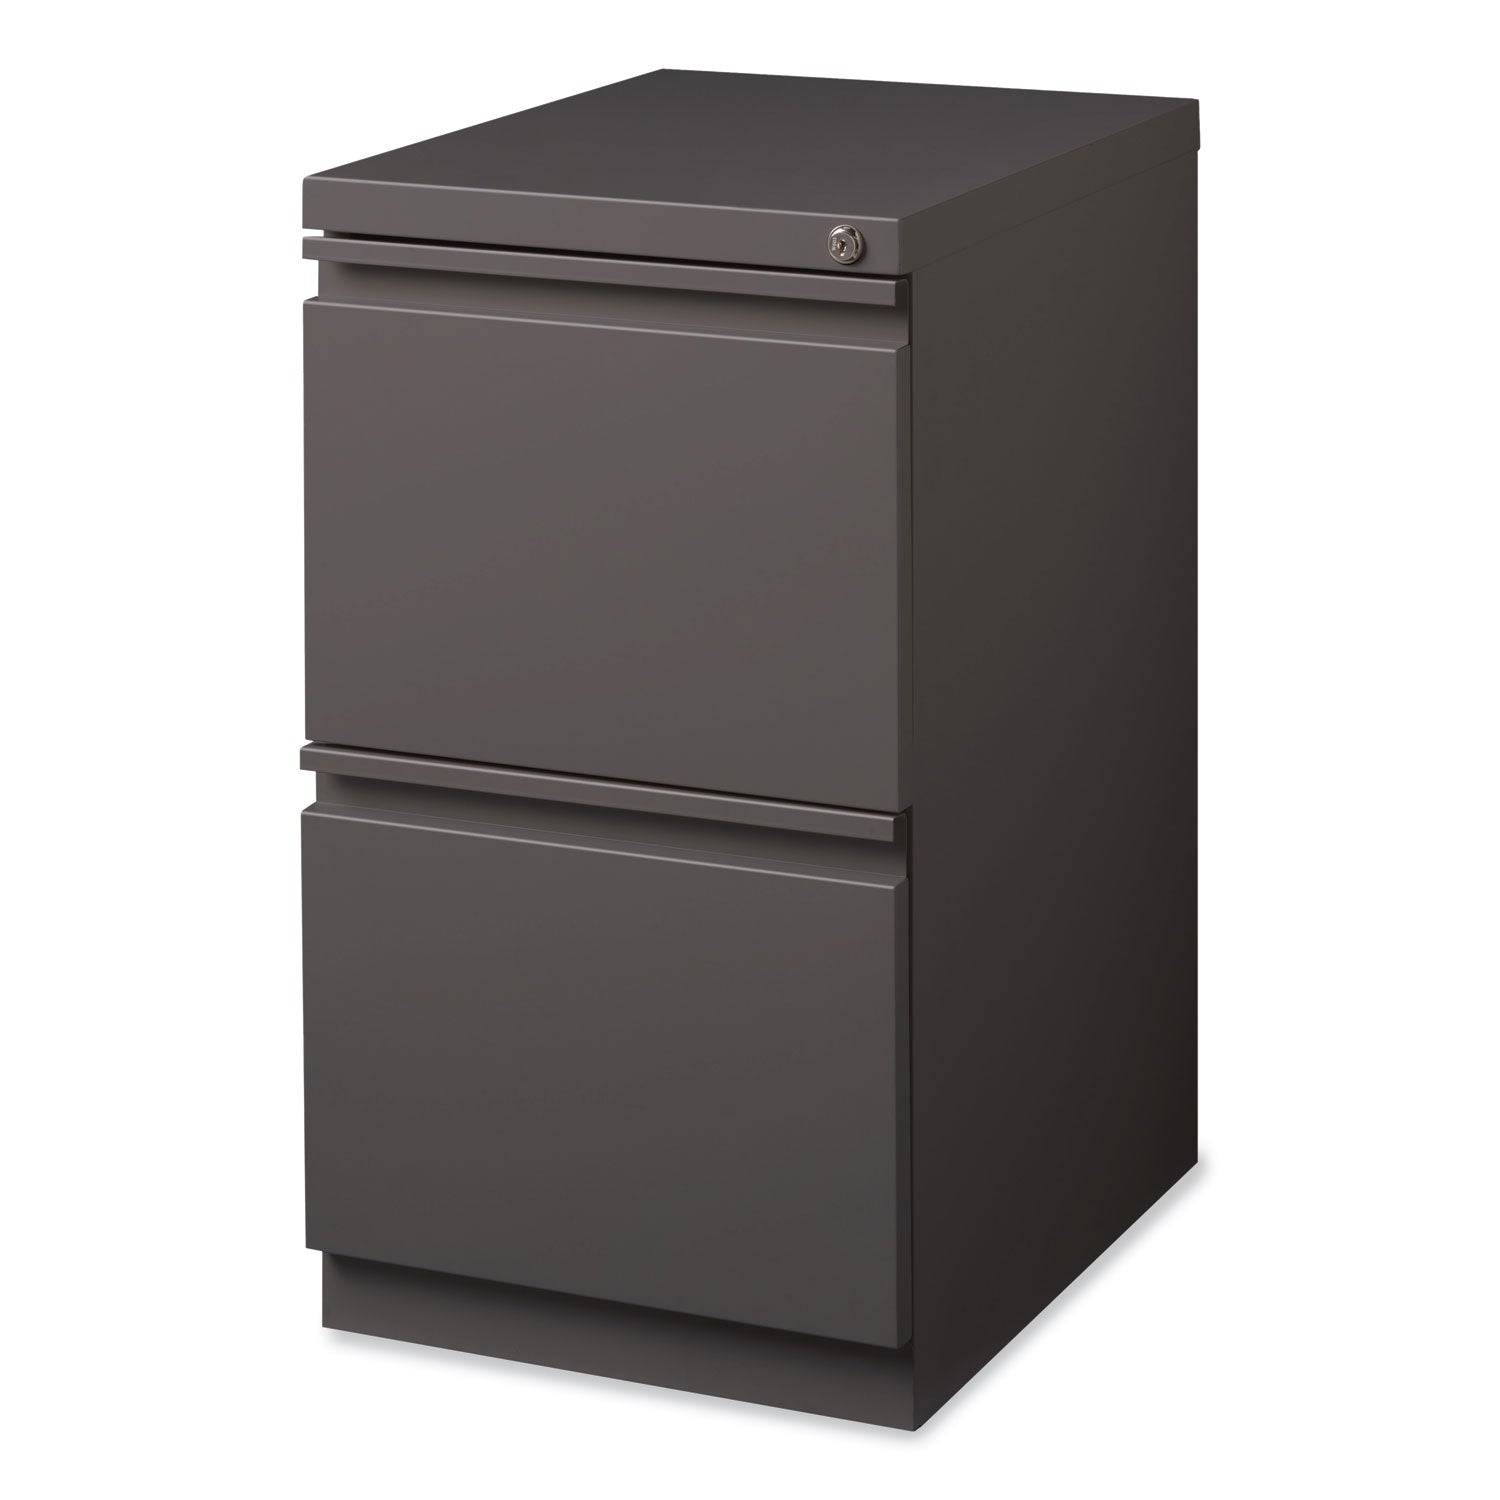 full-width-pull-20-deep-mobile-pedestal-file-file-file-letter-medium-tone-15-x-1988-x-2775-ships-in-4-6-business-days_hid19358 - 3